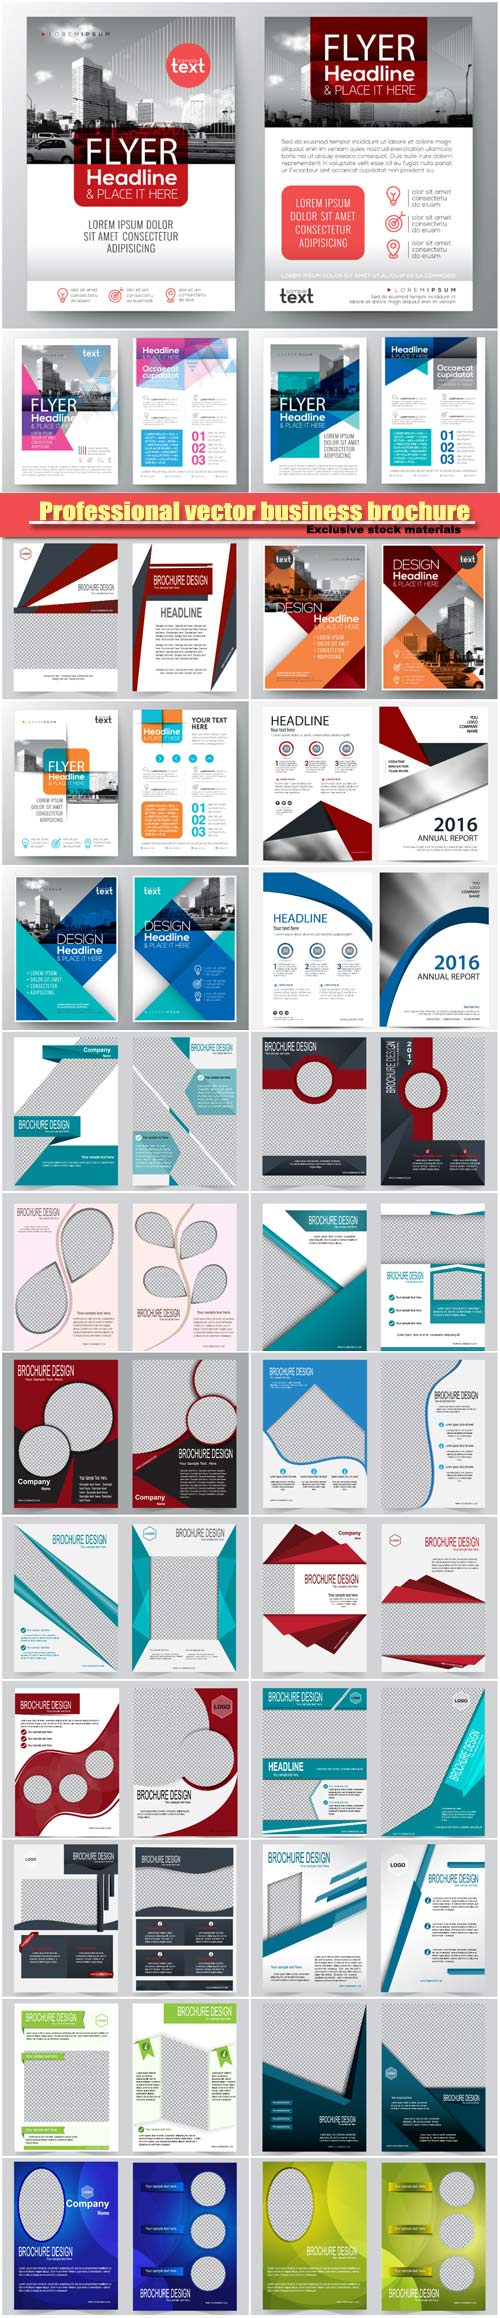 Professional vector business brochure annual report cover, flyer poster des ...